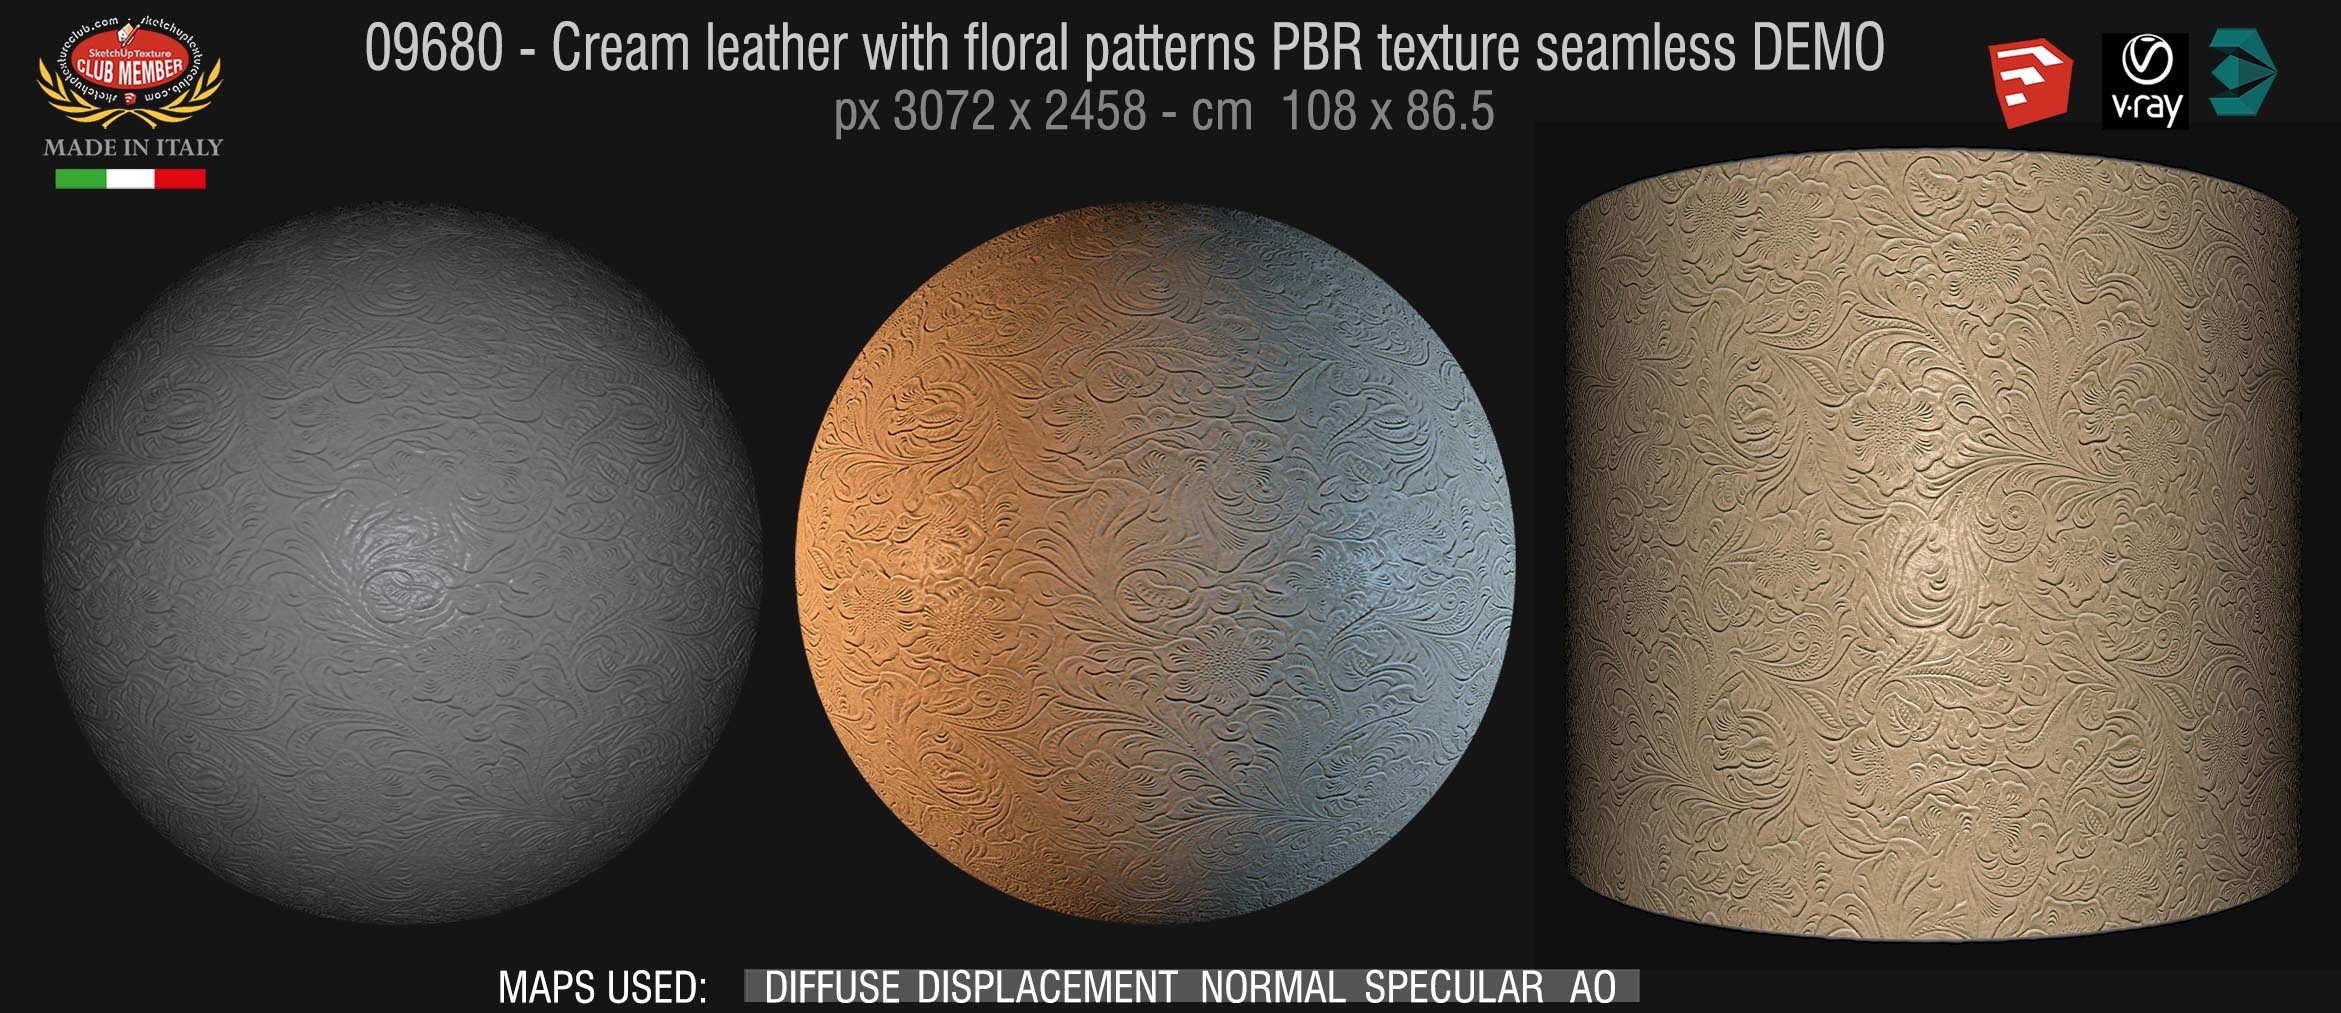 09680 Cream leather with floral patterns PBR texture seamless DEMO